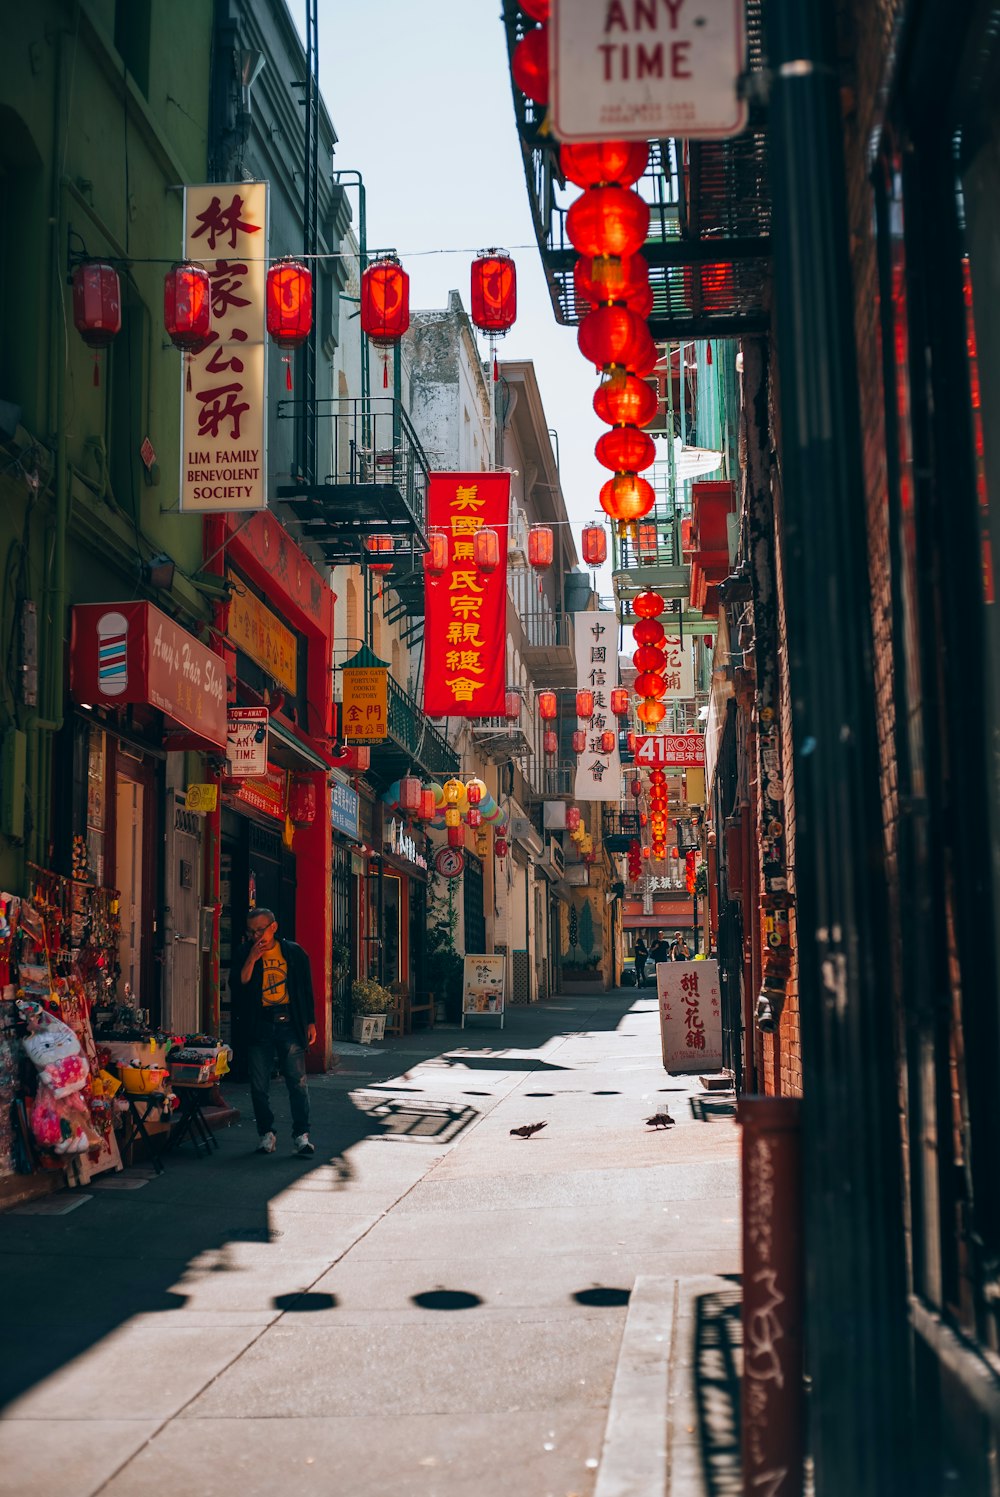 a narrow city street with red lanterns hanging from the buildings